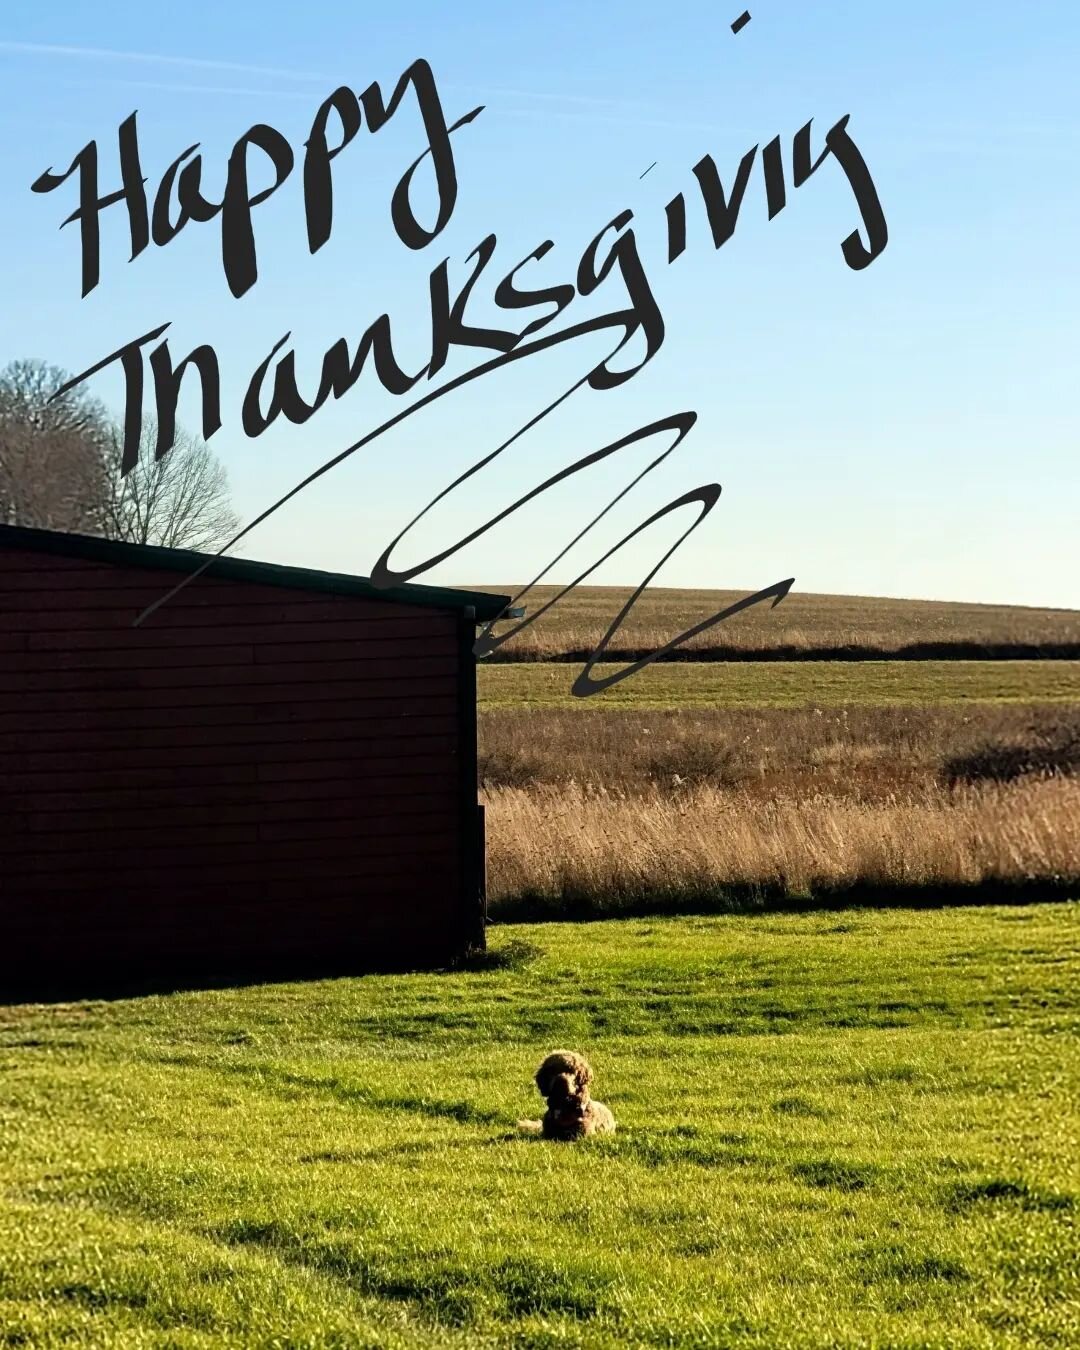 From all of us, to all of you. HAPPY THANKSGIVING.